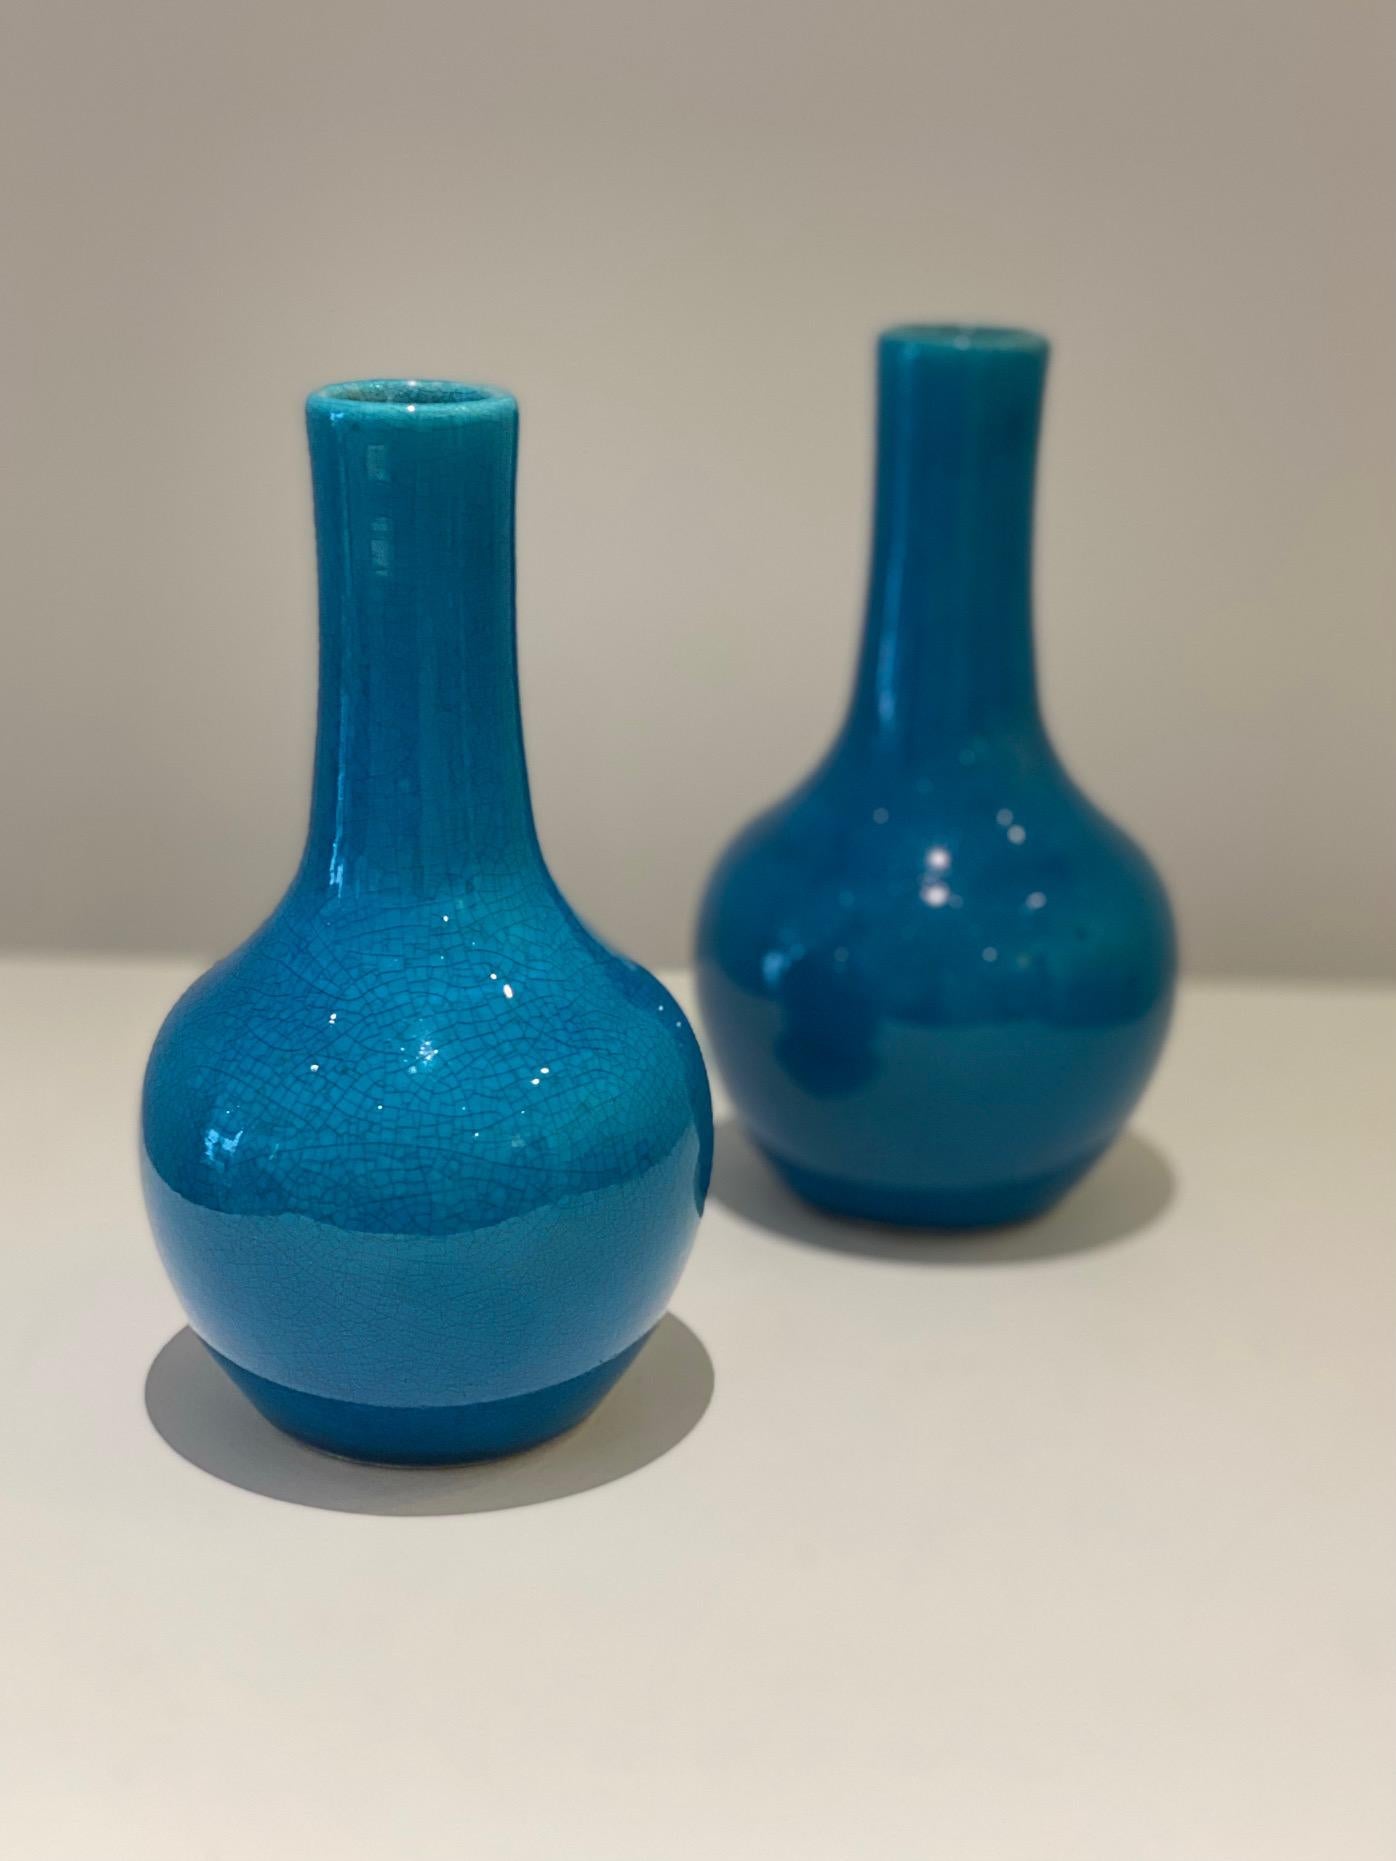 Pol Chambost 1970's Pair of Blue Ceramic Small Vases For Sale 1